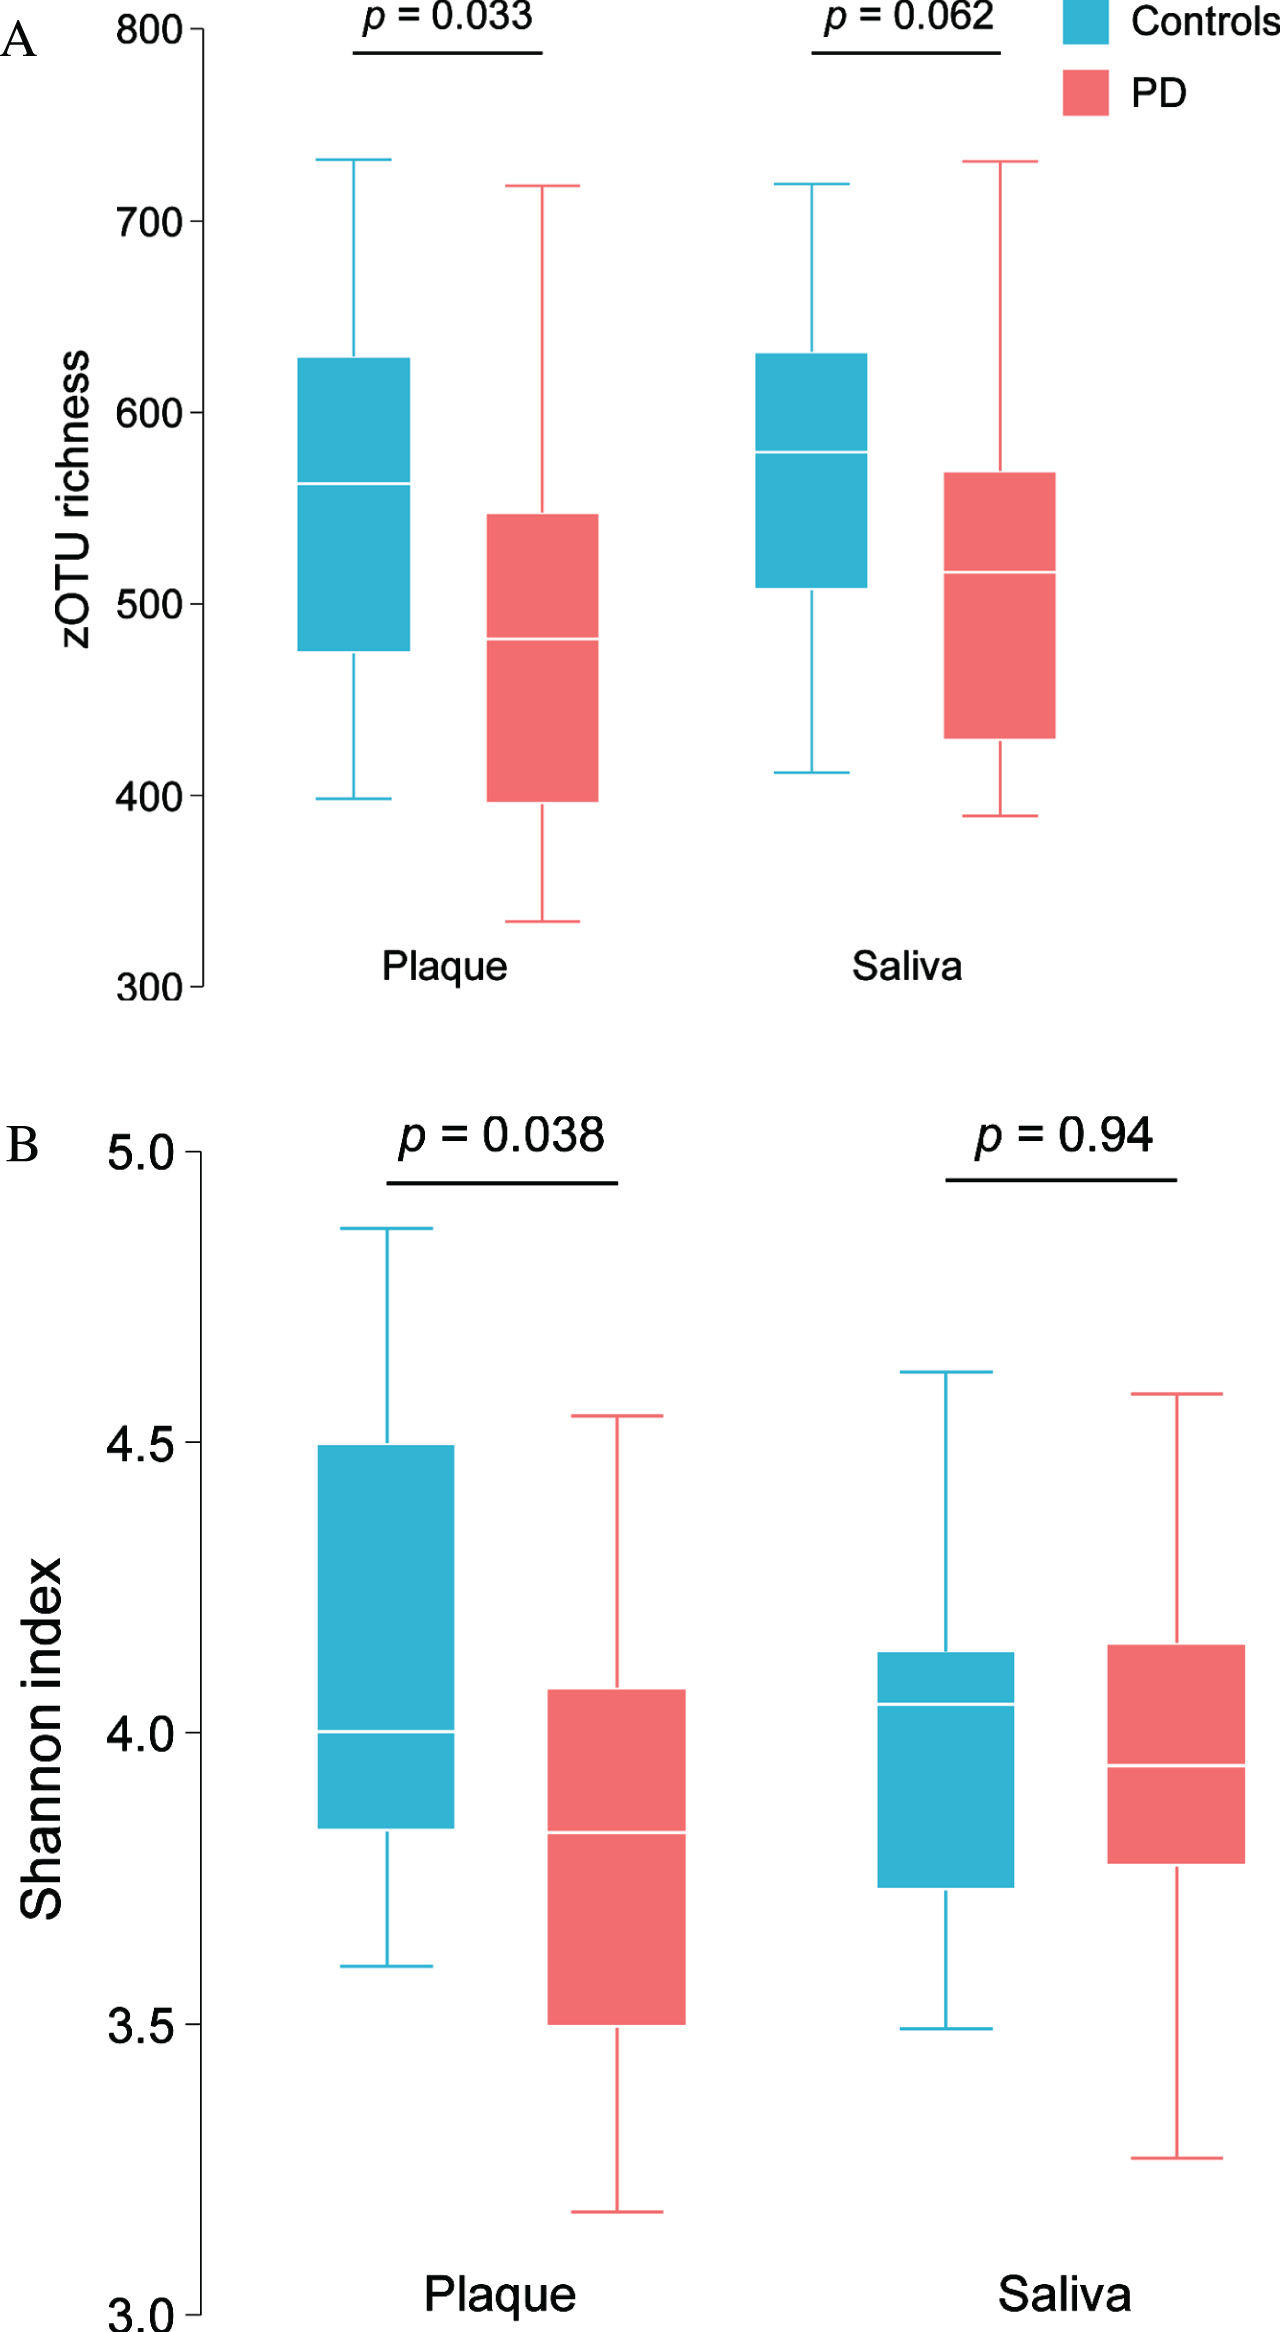 zOTU richness (A) and Shannon bacterial diversity index (B) in saliva and dental plaque samples in PD patients and controls.